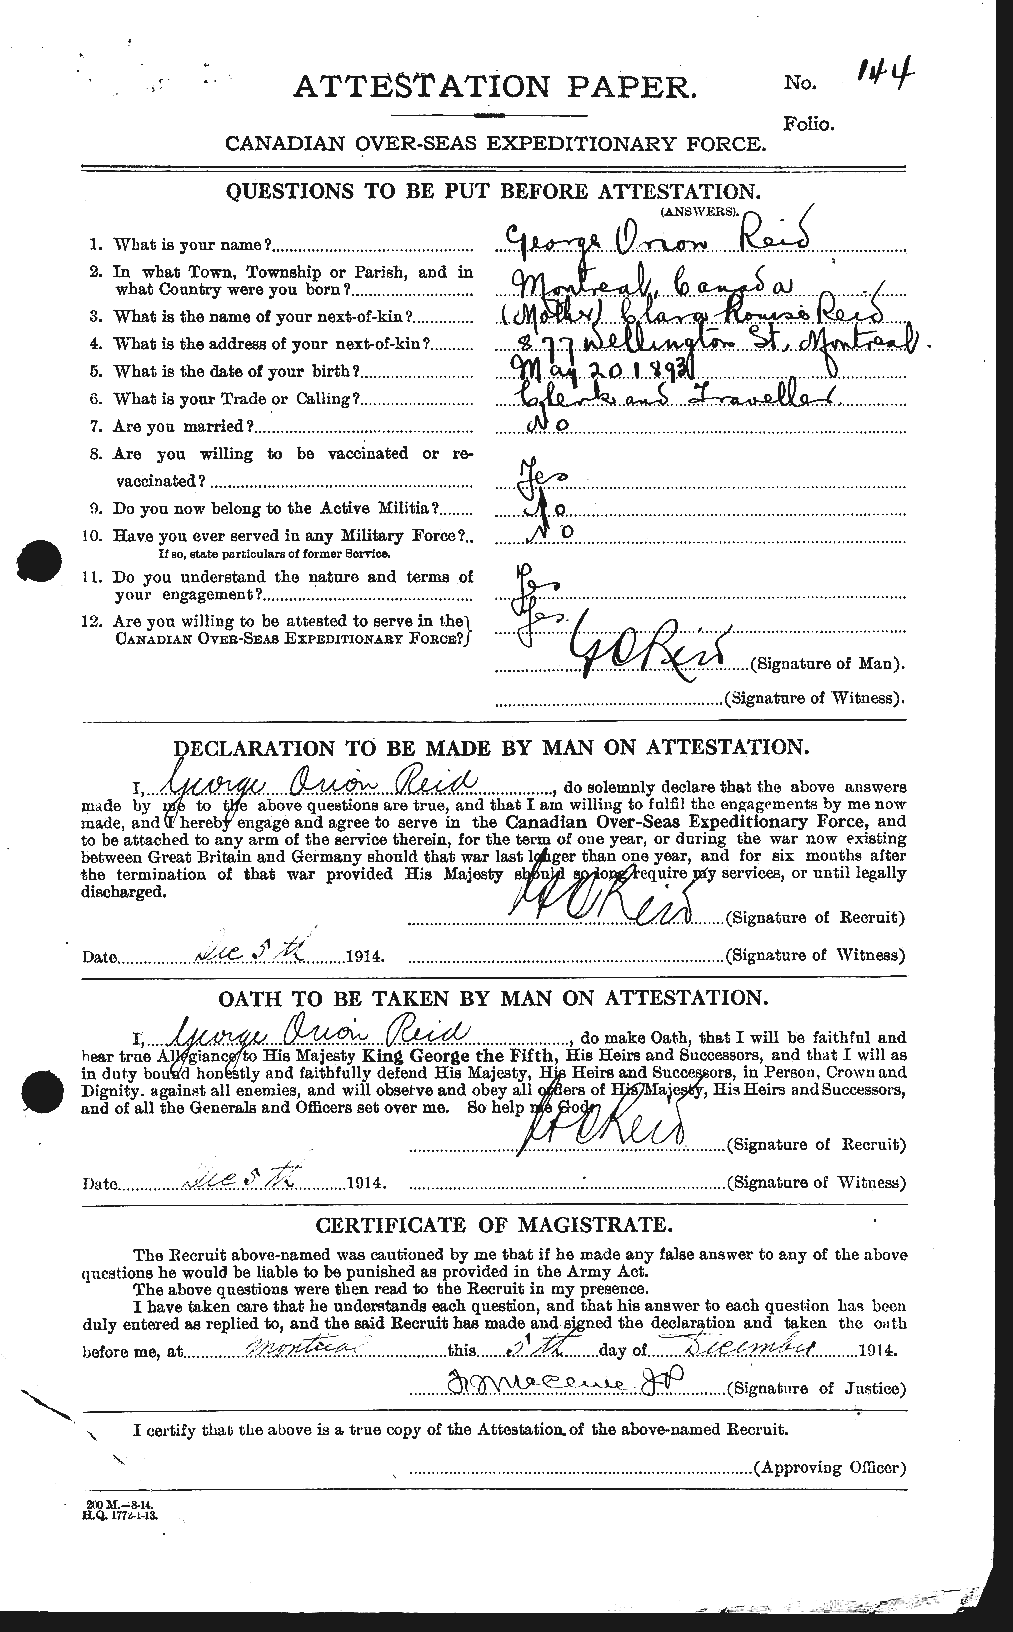 Personnel Records of the First World War - CEF 596311a